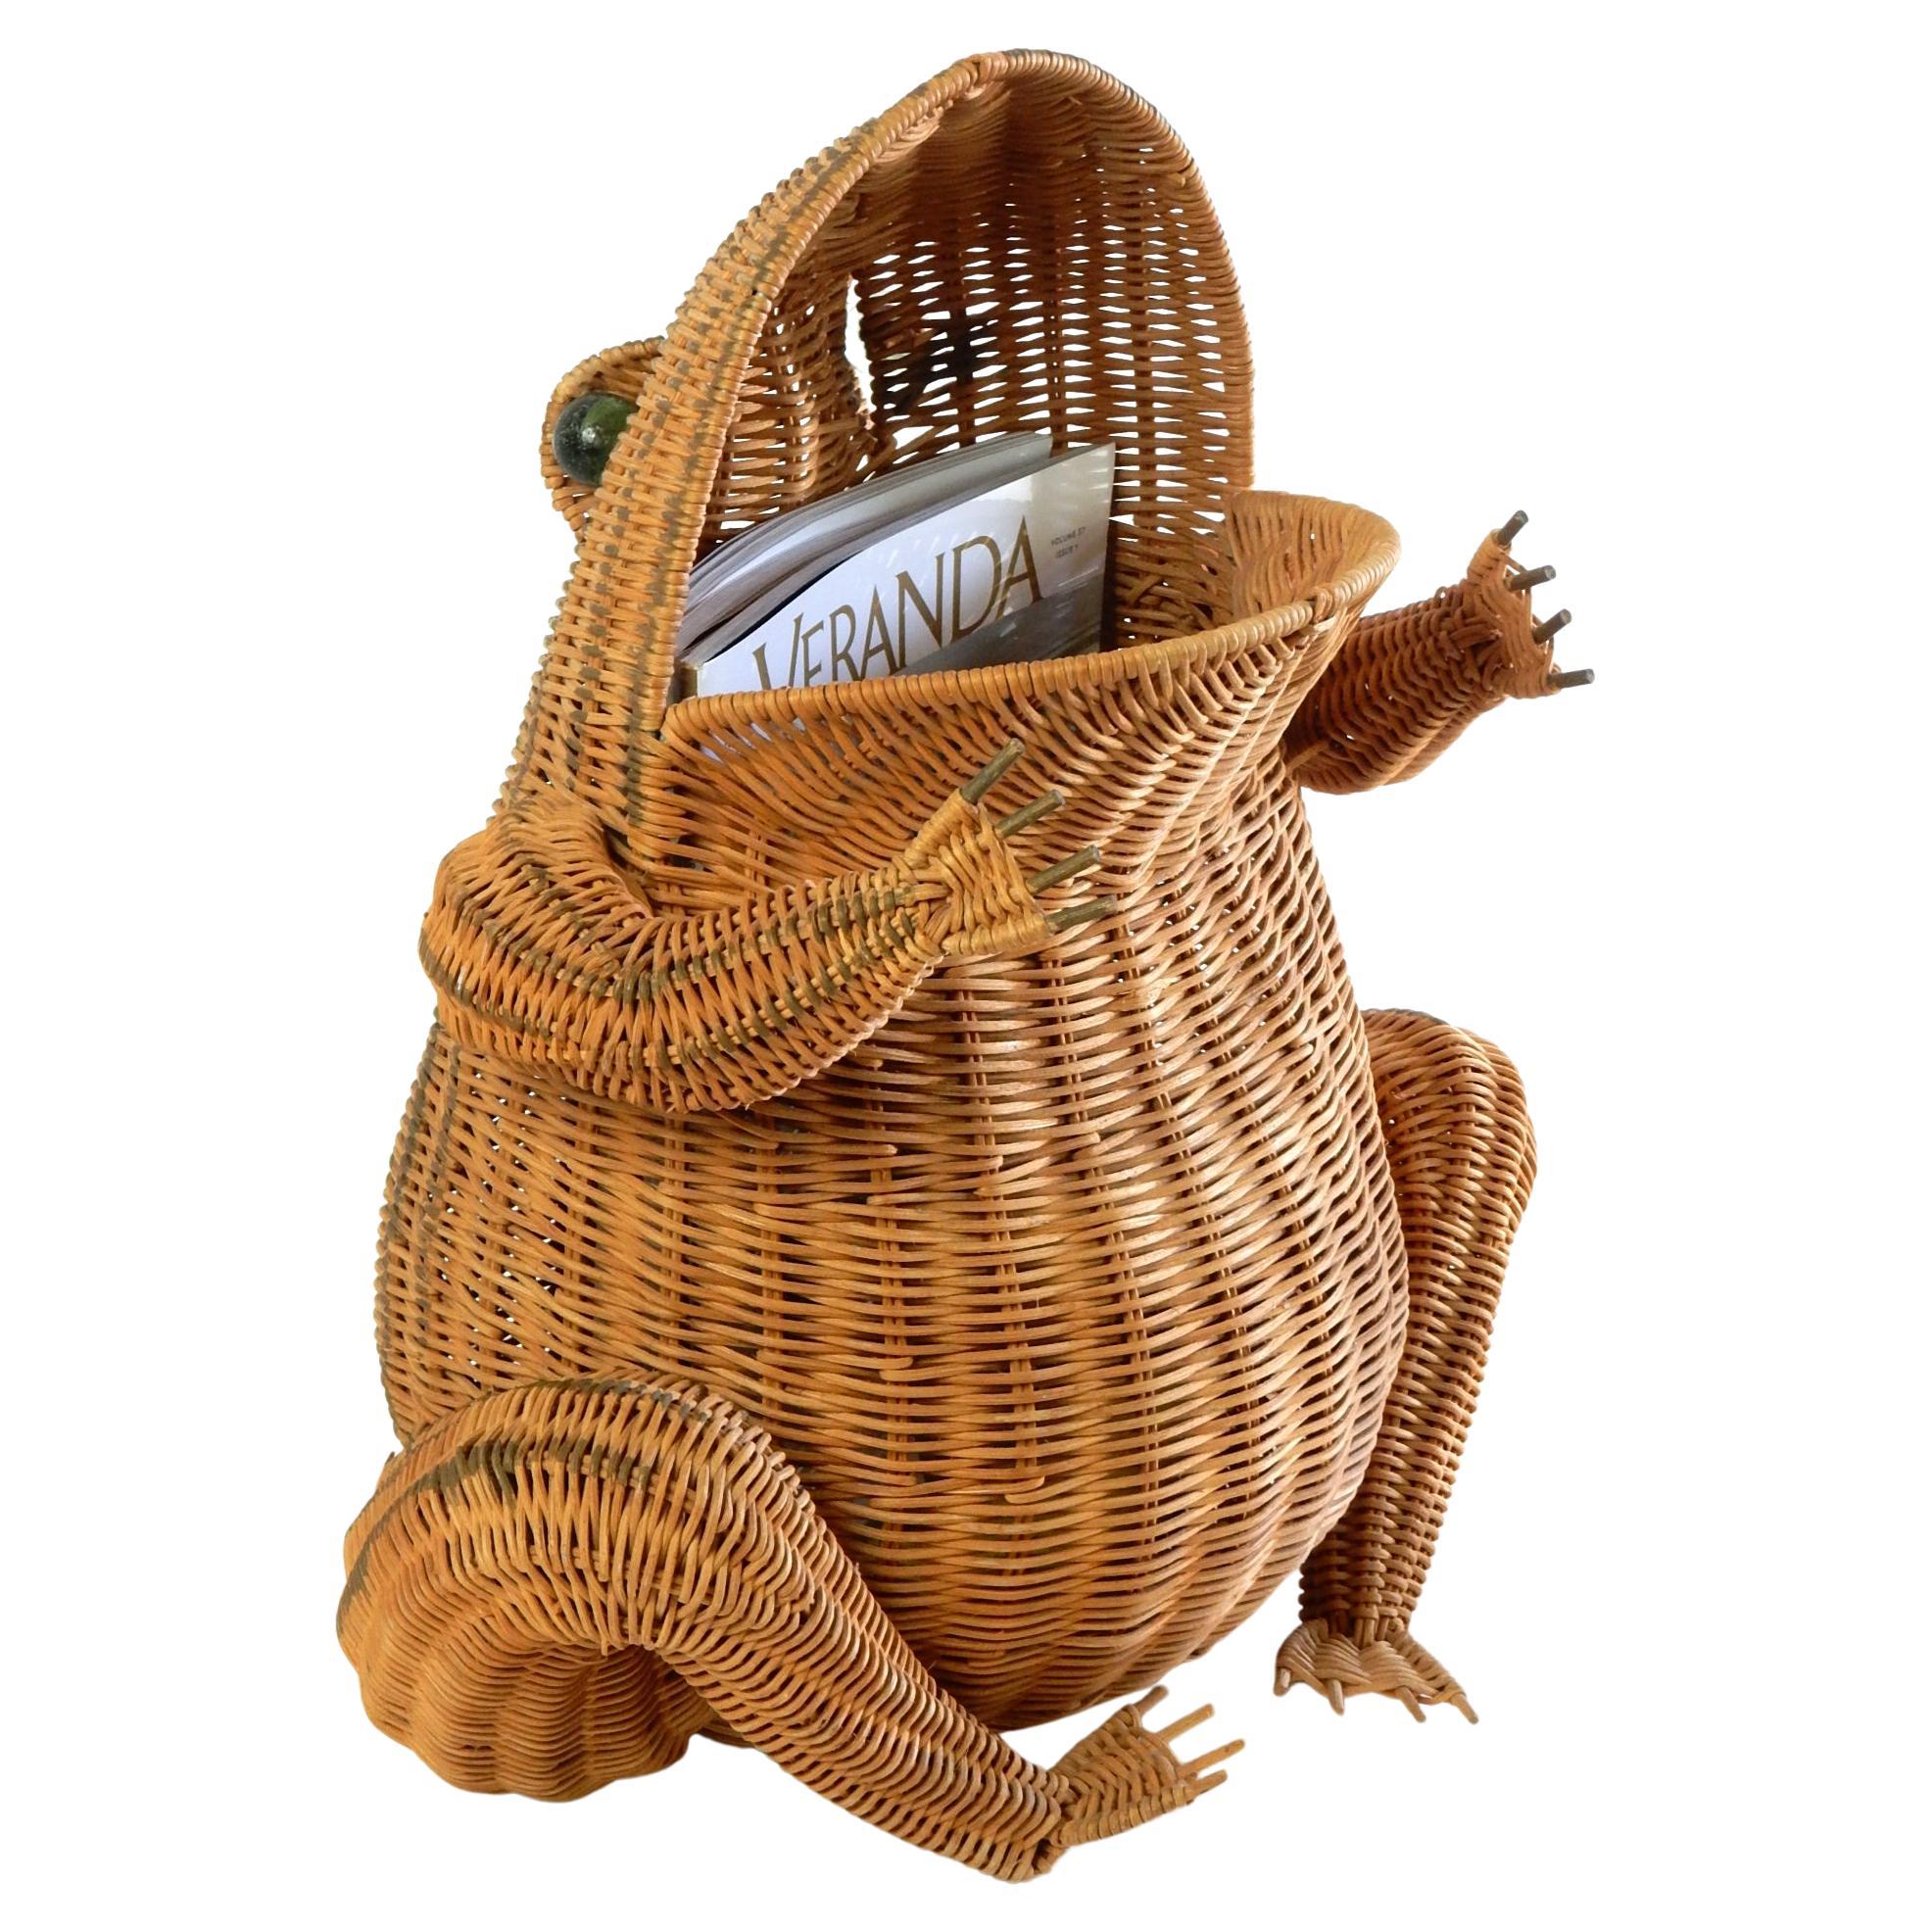 Vintage wicker frog basket which makes a perfect magazine holder or catch-all.
circa 1970s. Glass marble eyes. Green stripes down back. 
Small label on bottom 